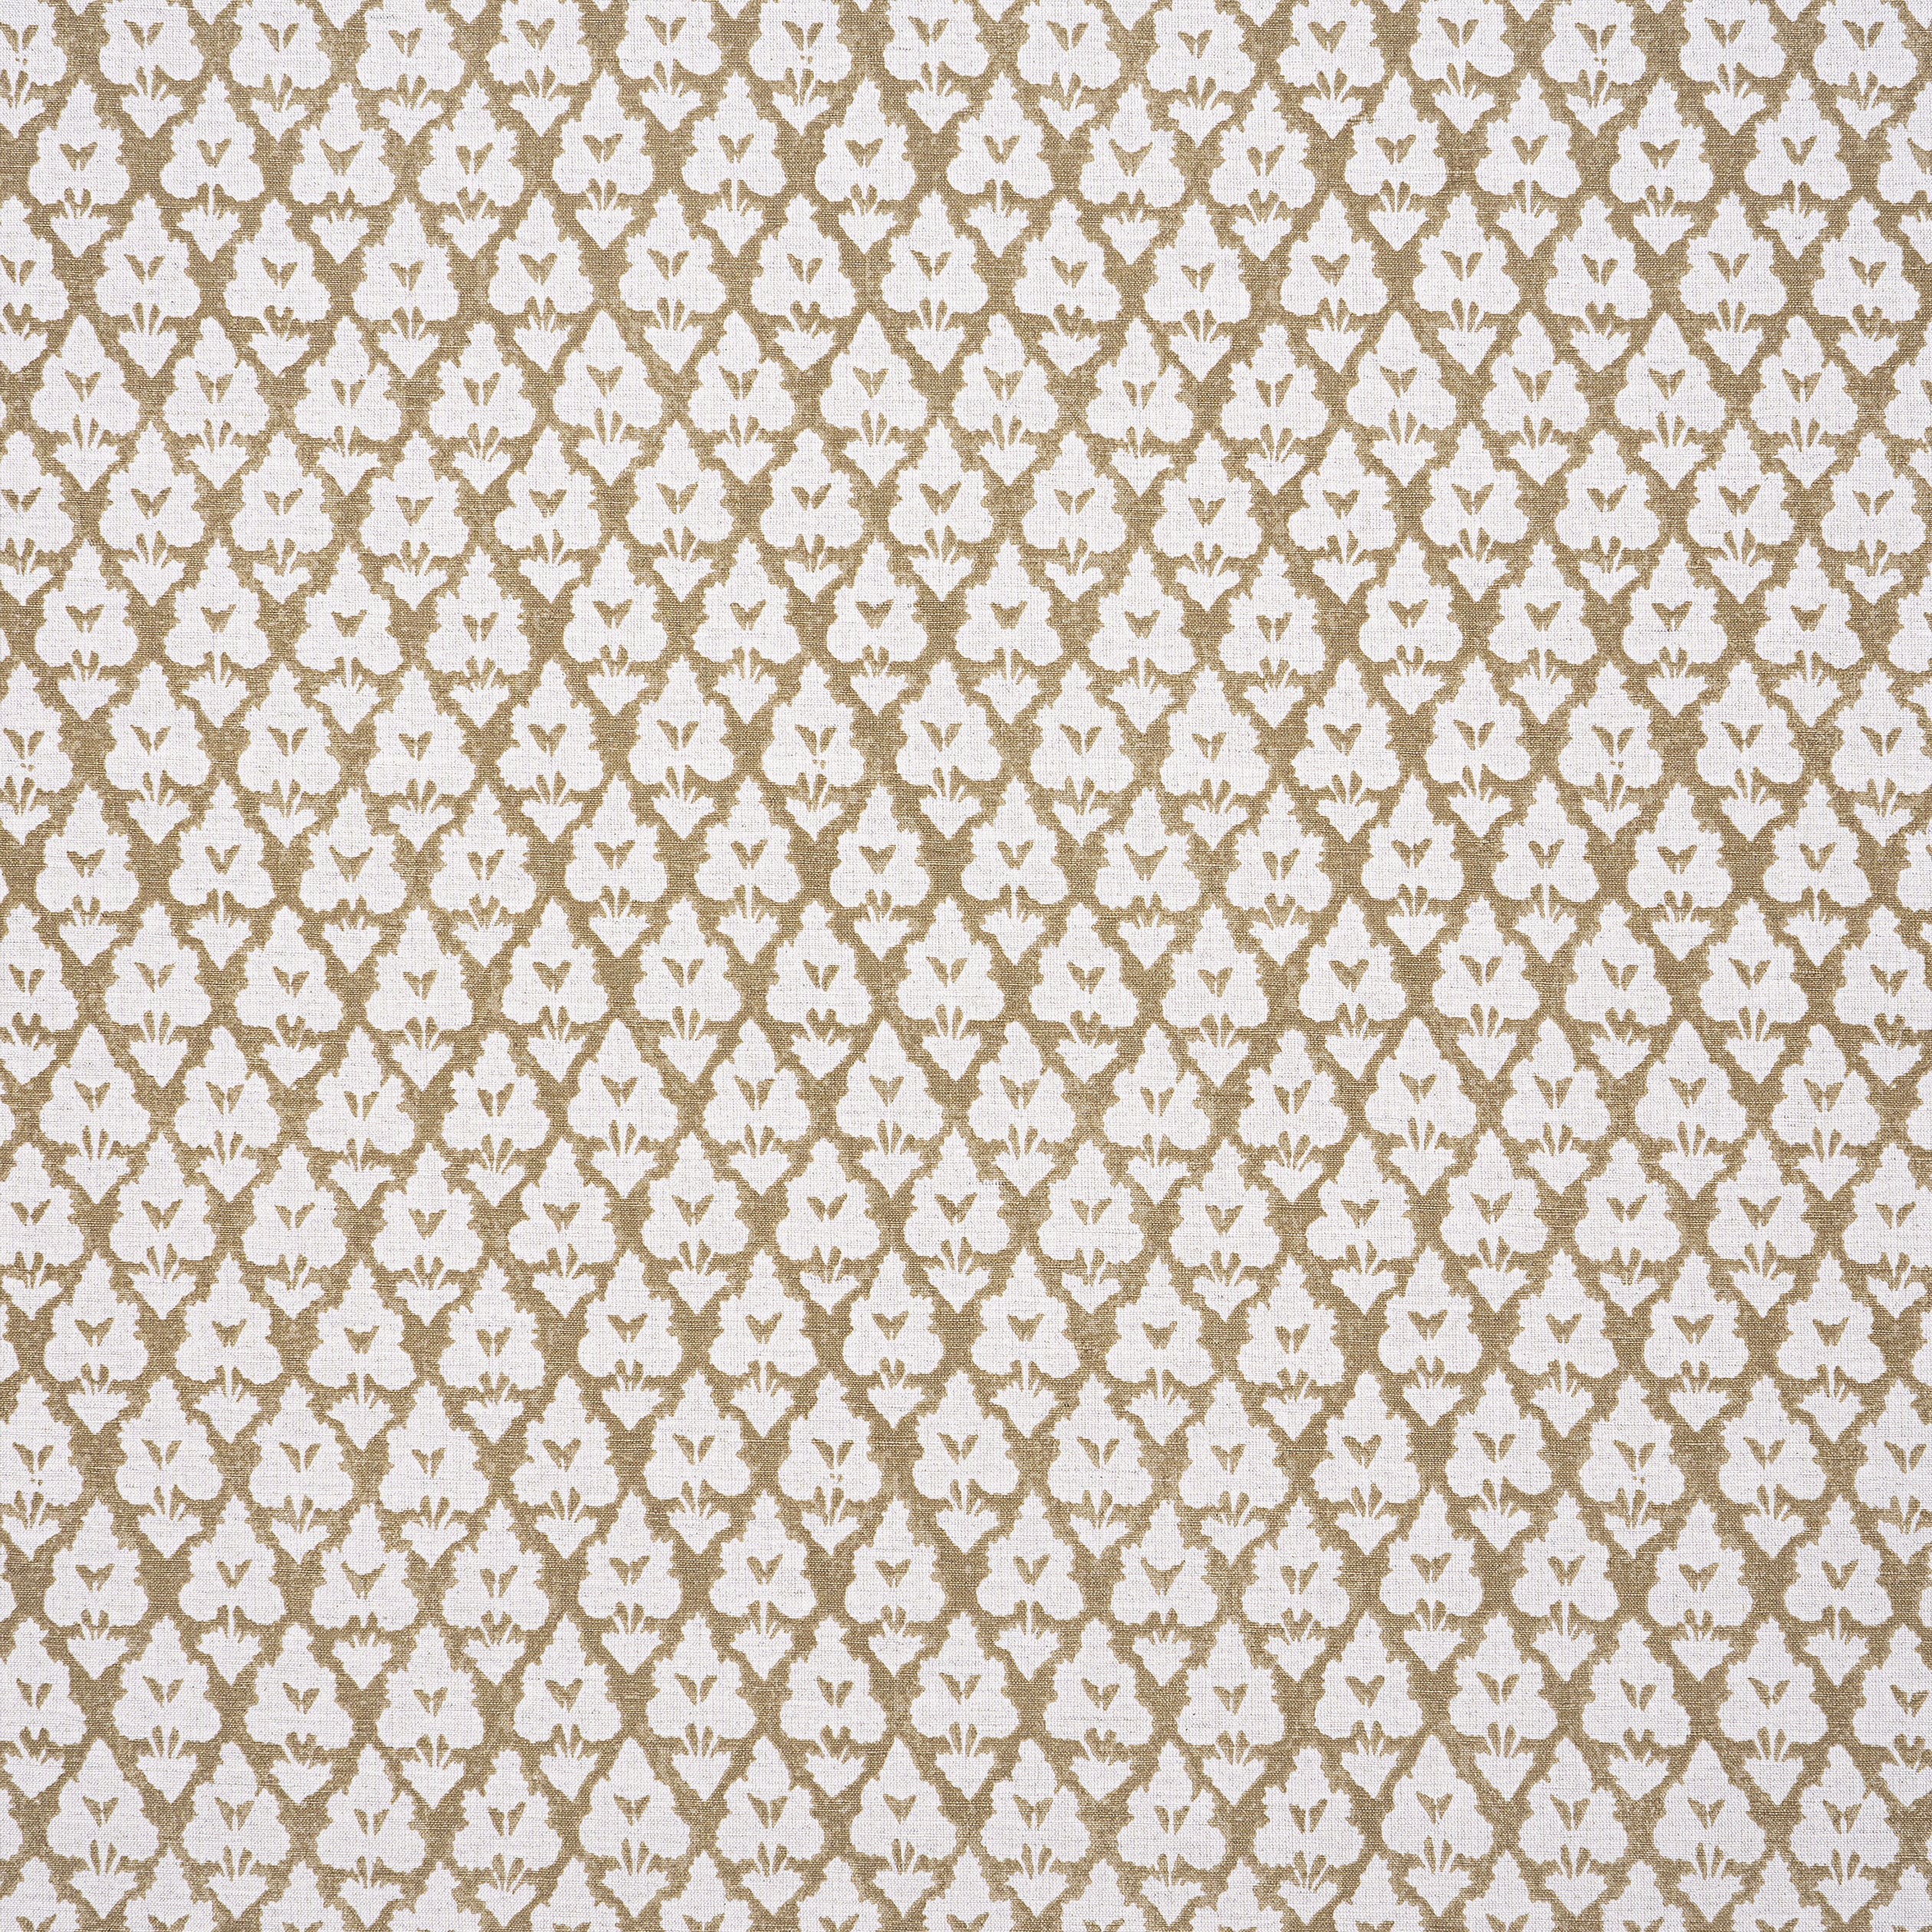 Arboreta fabric in brown color - pattern number F910836 - by Thibaut in the Heritage collection